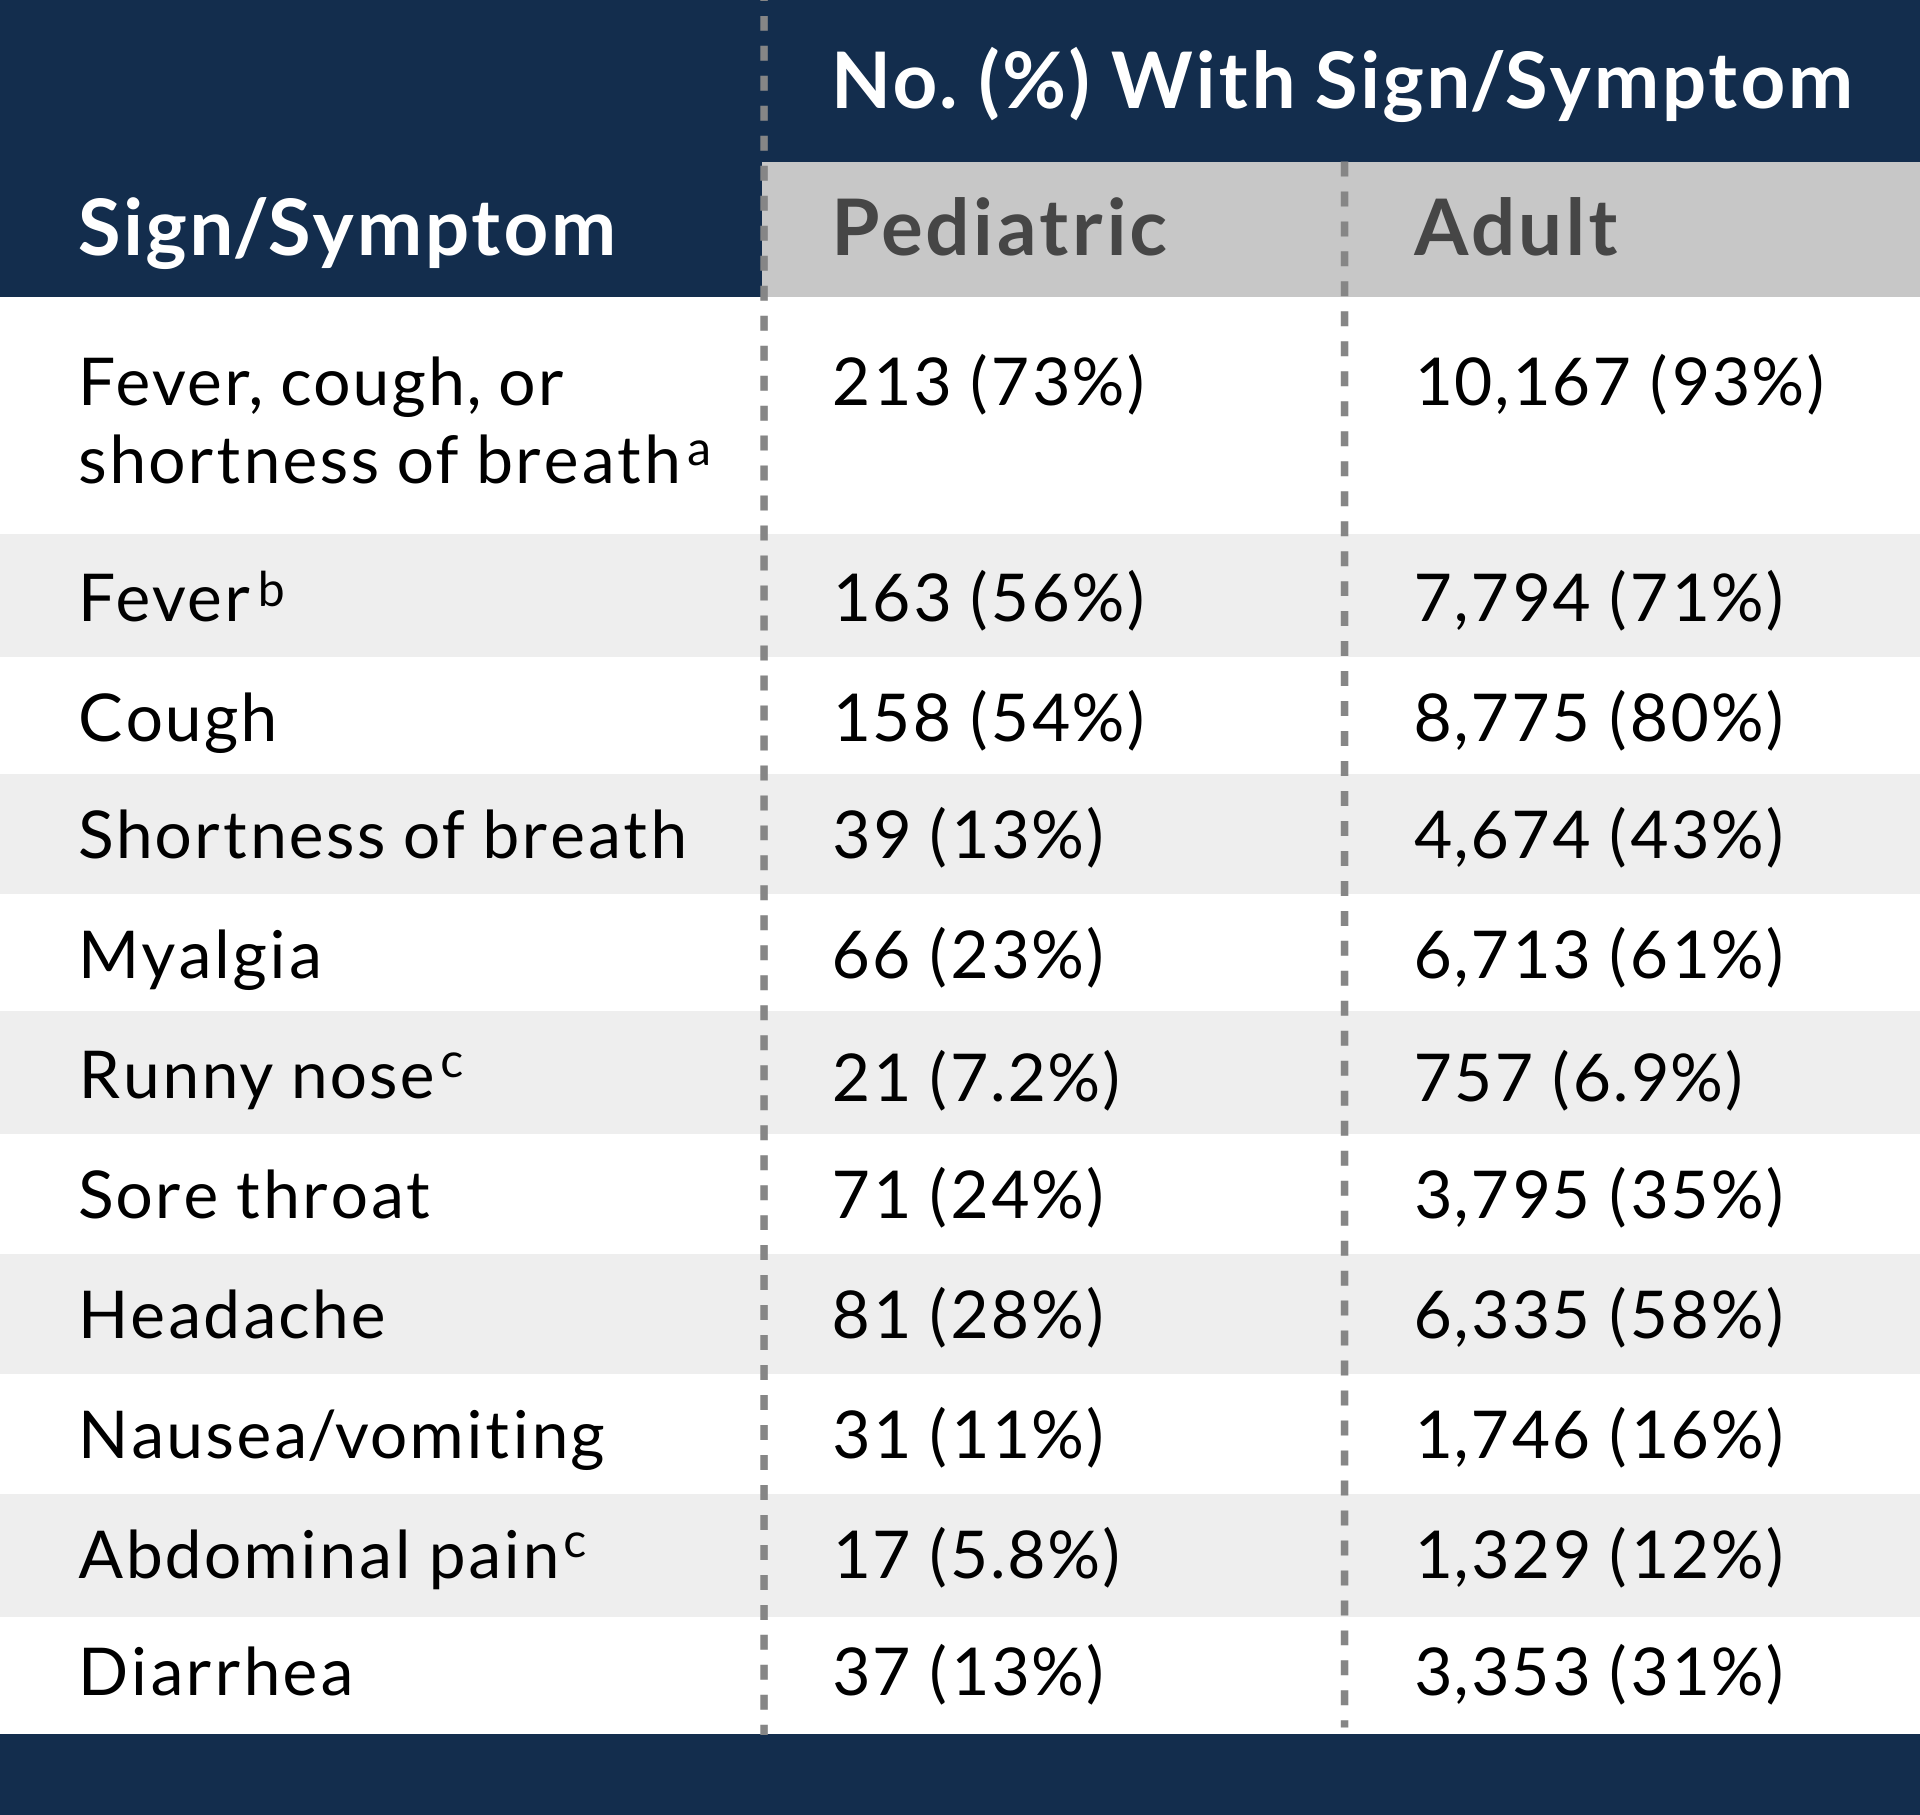 Signs and symptoms among 291 pediatric (age <18 years) and 10,944 adult (age 18-64 years) patients* with laboratory-confirmed COVID-19 in the US from February 12, 2020, to April 2, 2020